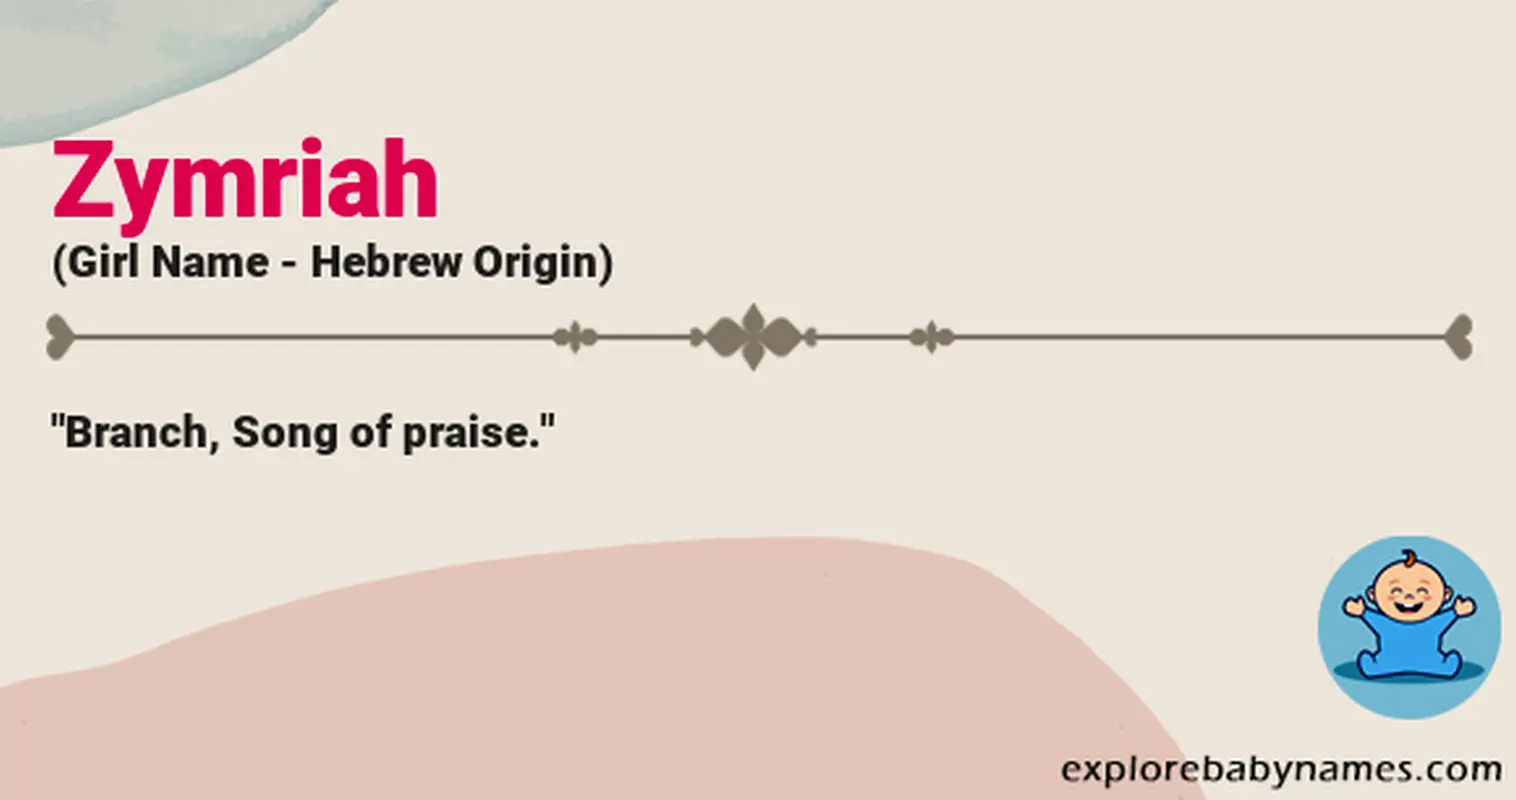 Meaning of Zymriah